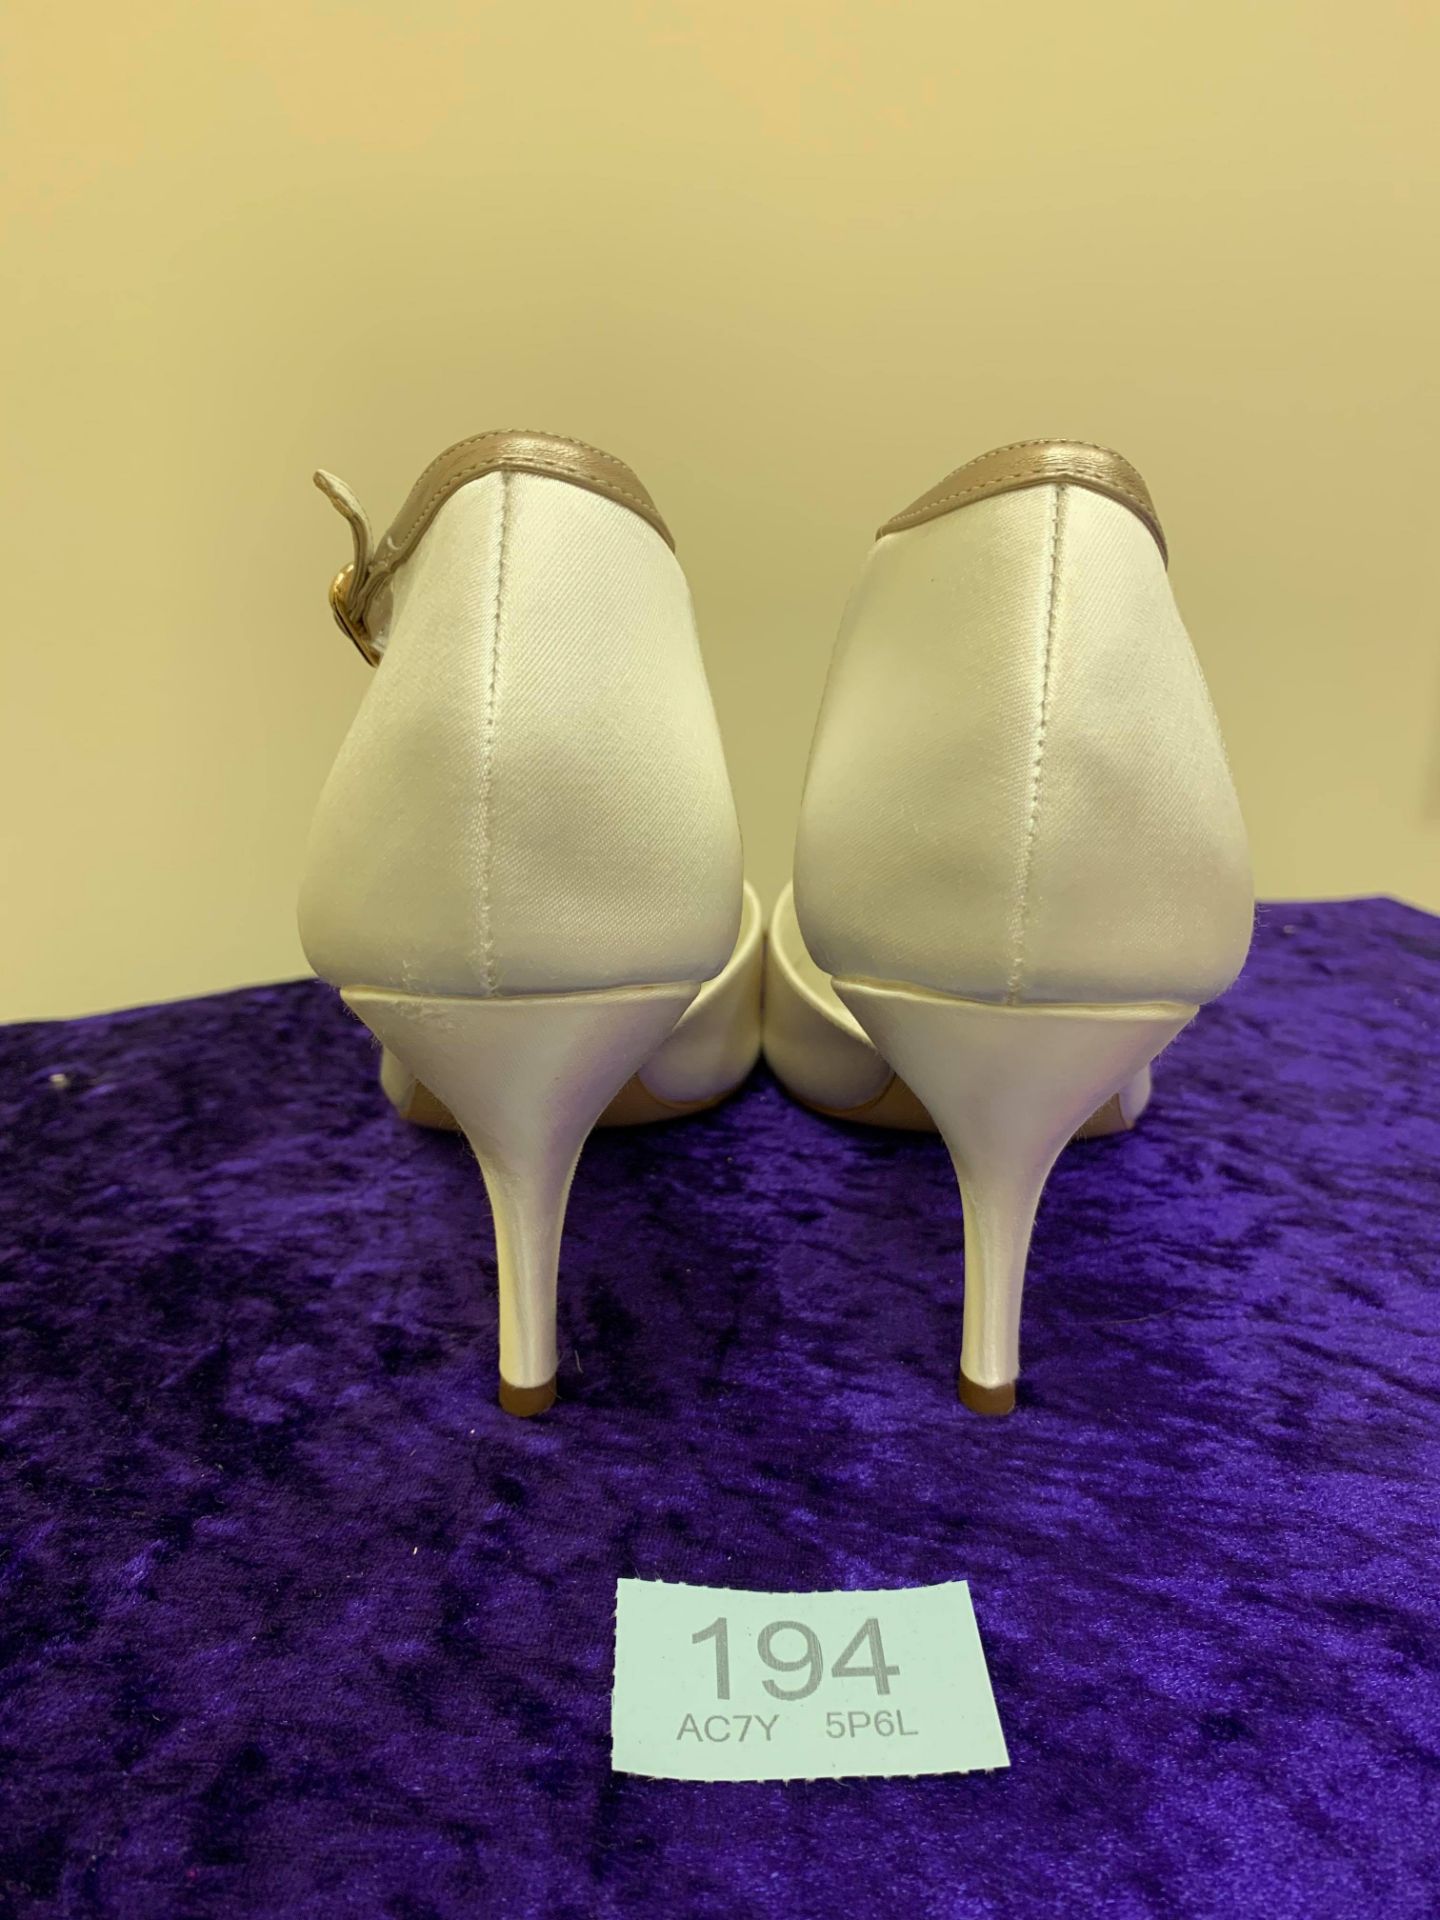 Designer Shoes Ivory/Champagne In Size 42. Code 195 - Image 5 of 7